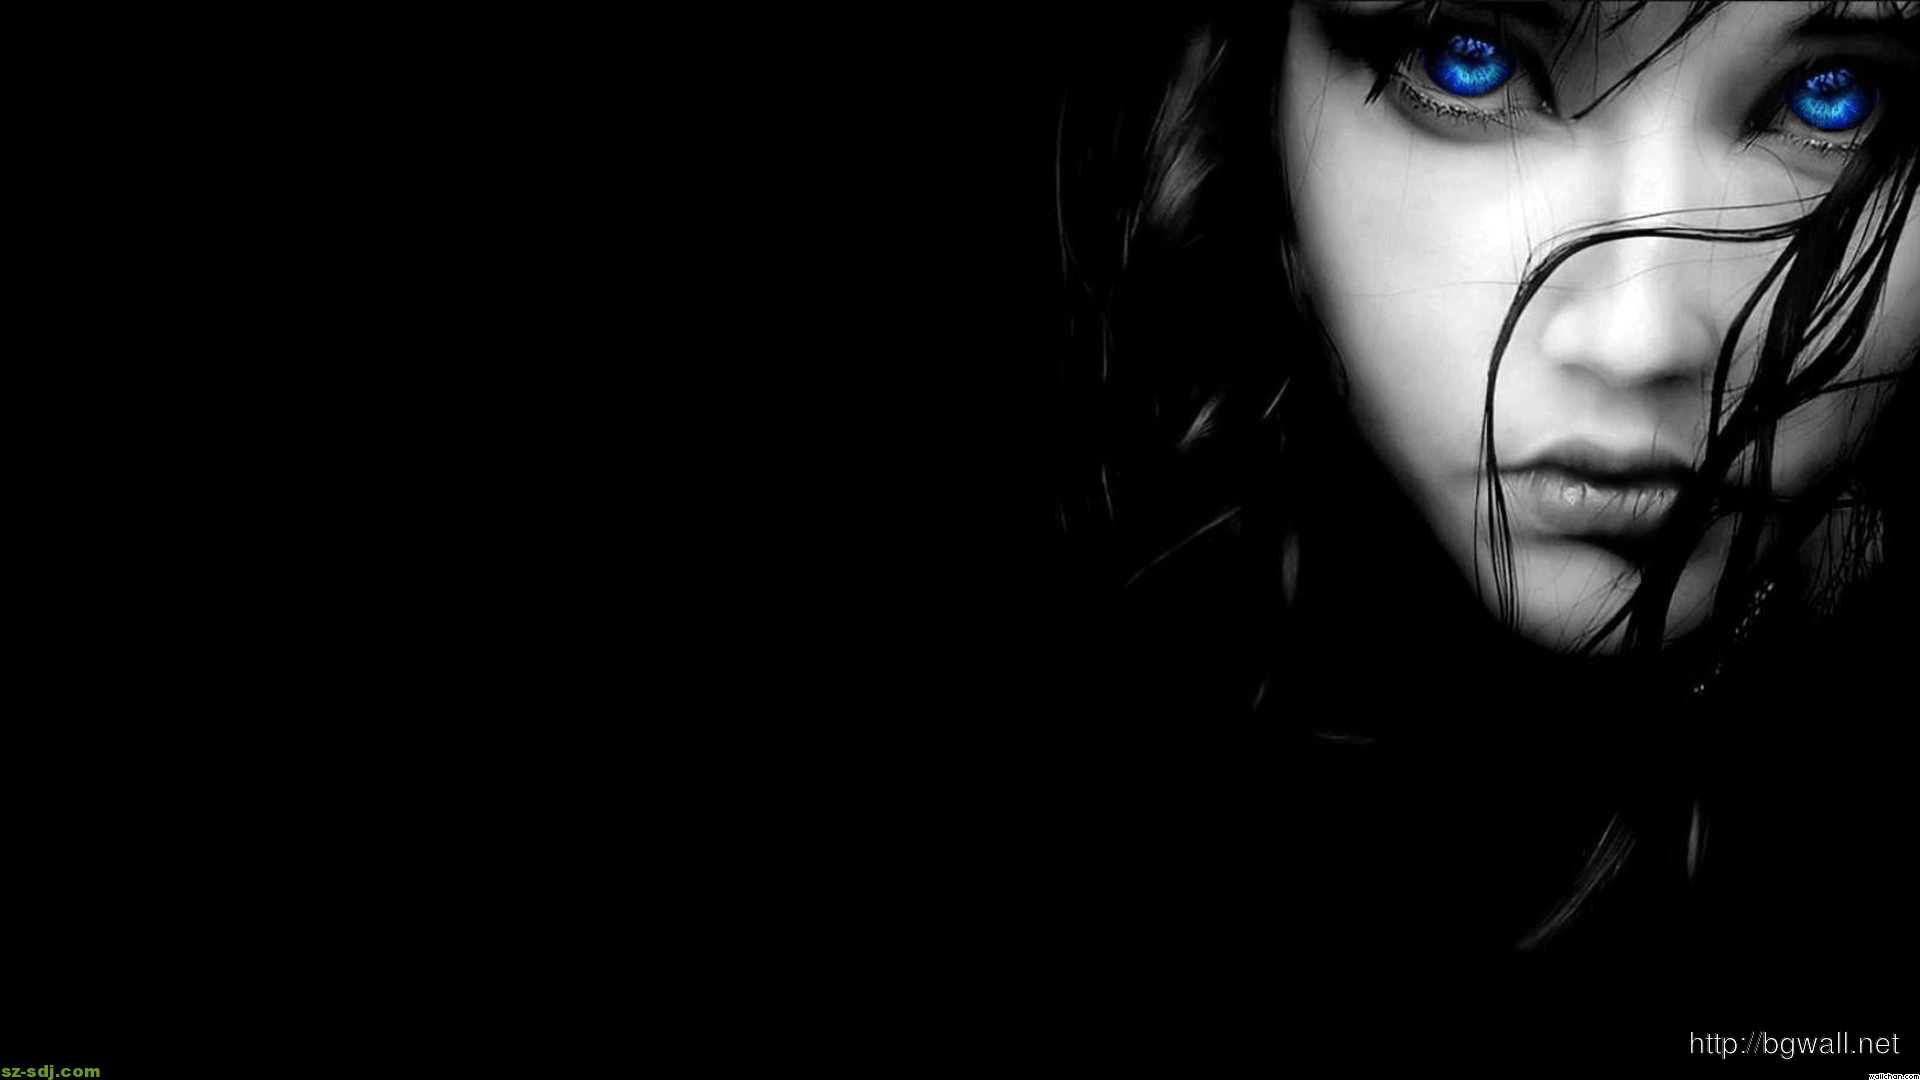 Black And Blue Eyes Wallpaper Widescreen